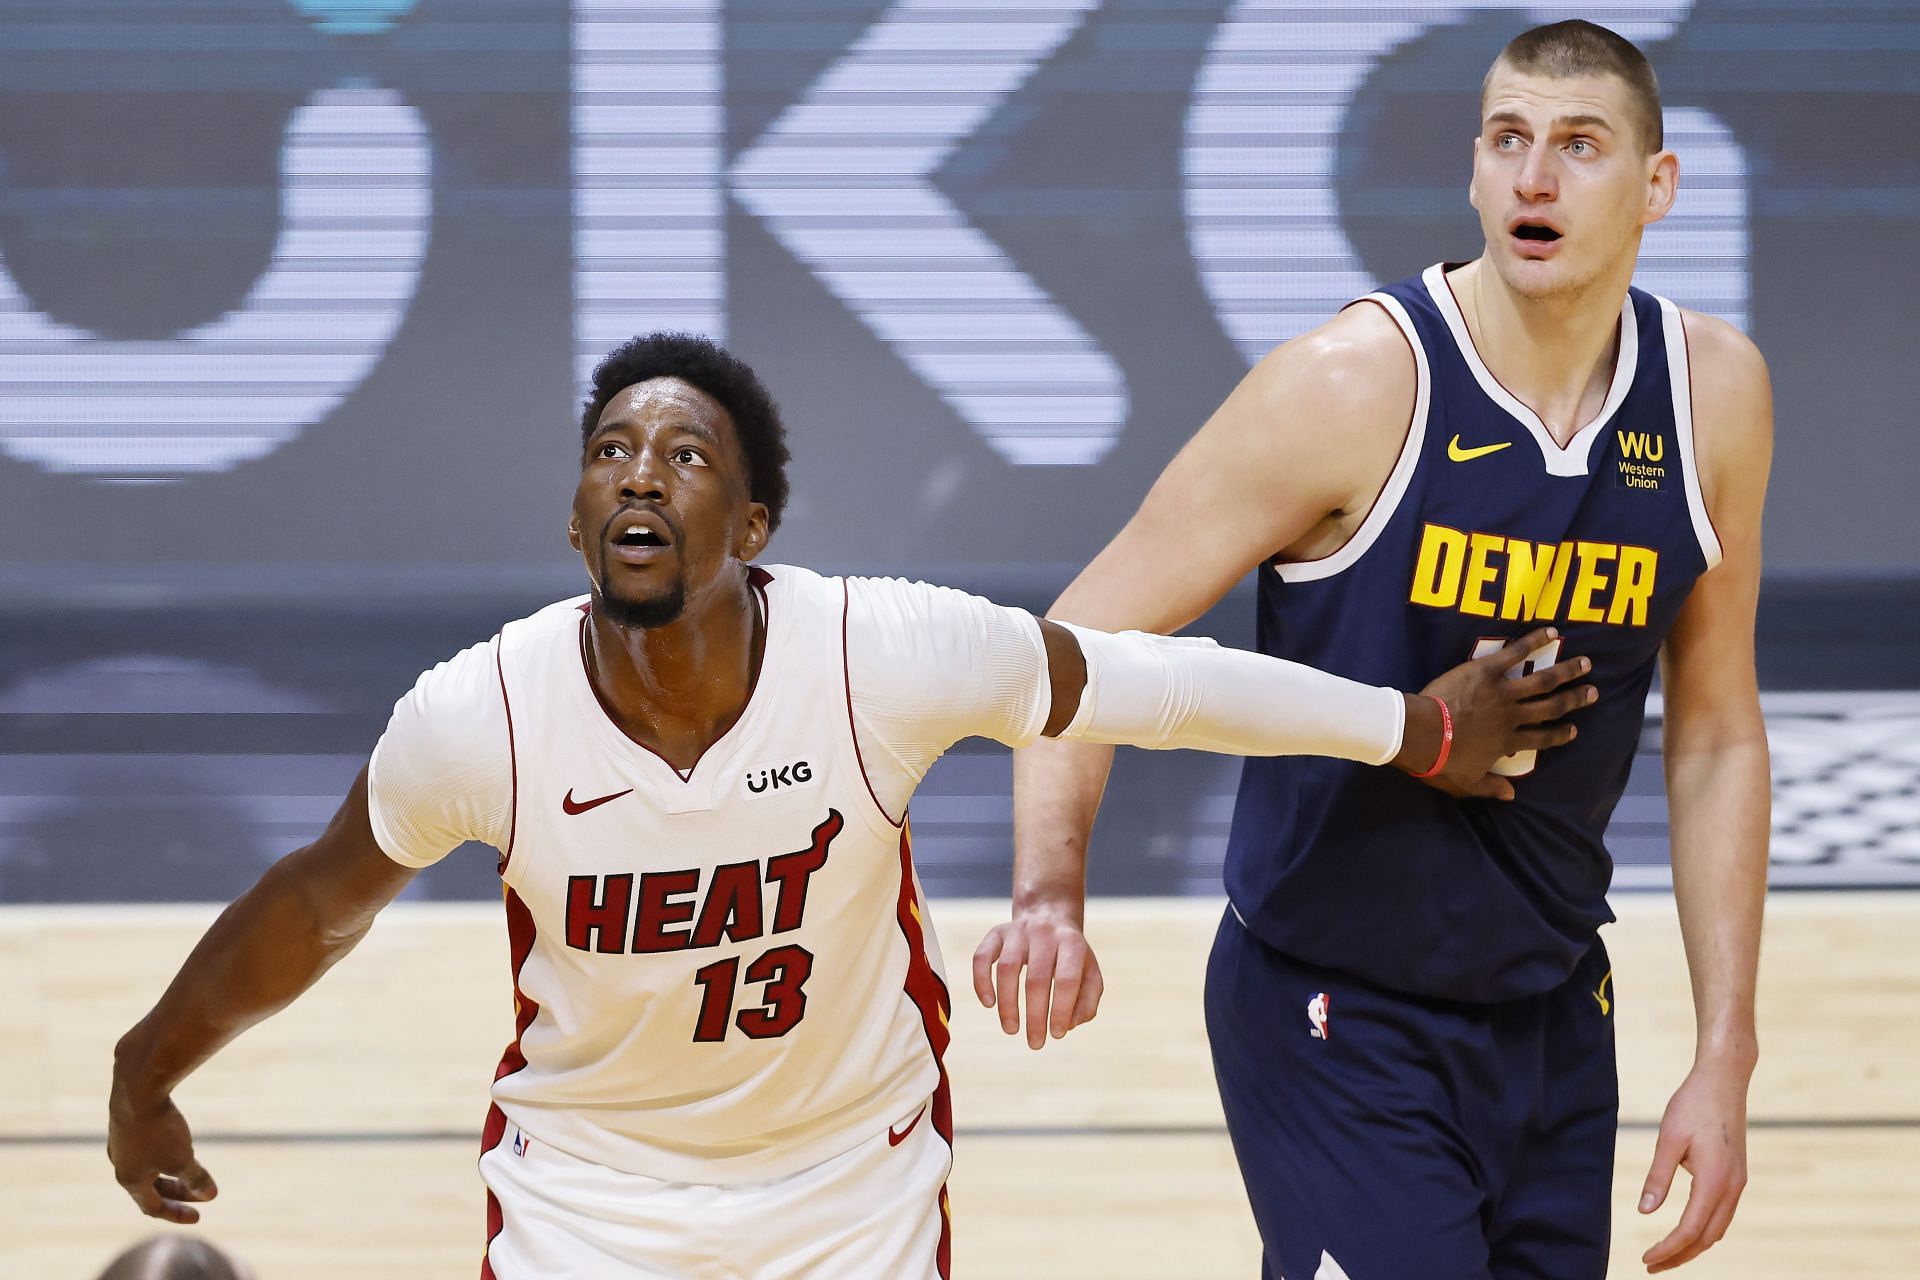 Denver Nuggets will play the Miami Heat on Monday night